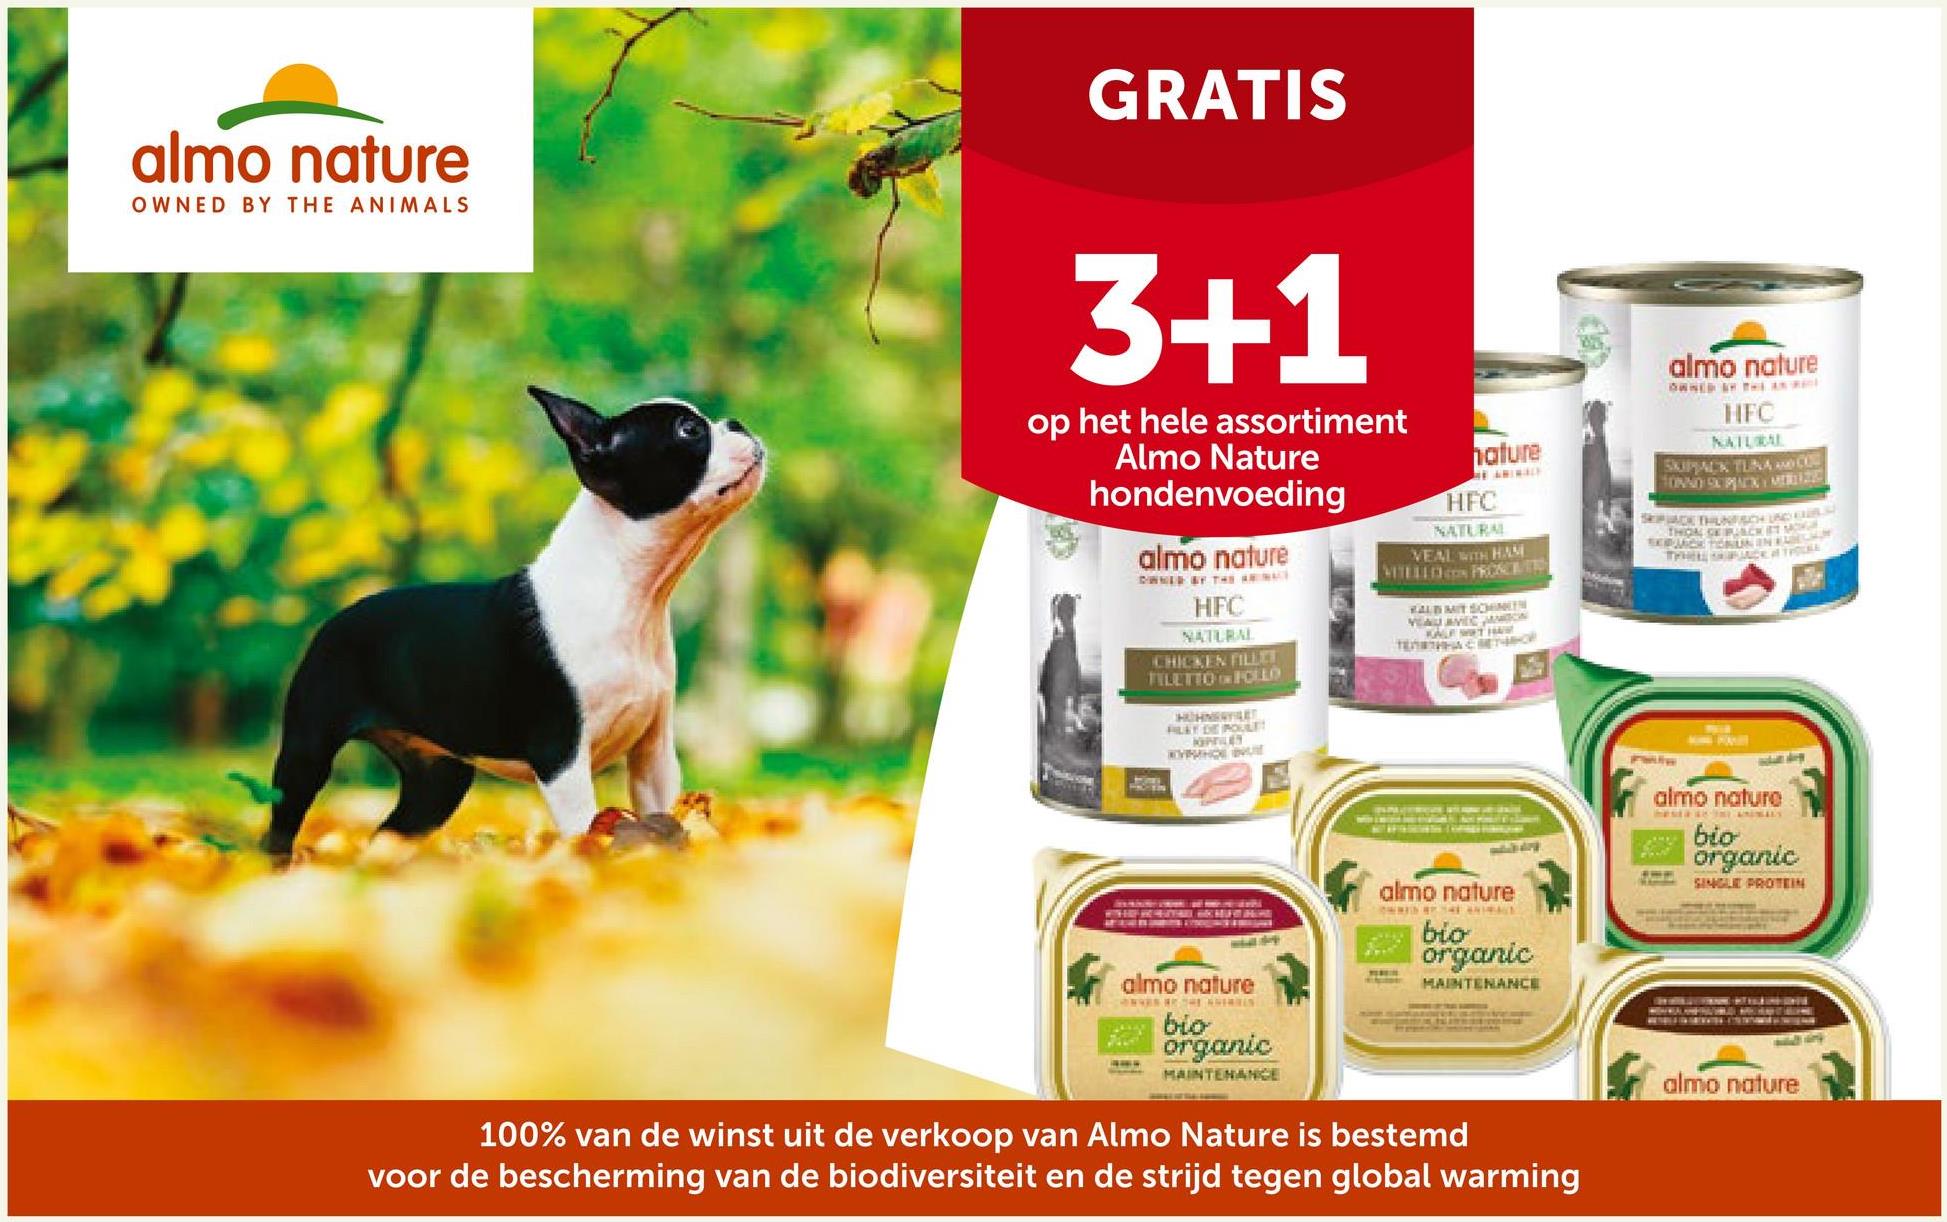 almo nature
OWNED BY THE ANIMALS
GRATIS
3+1
op het hele assortiment
Almo Nature
hondenvoeding
almo nature
DWNER OF THE AN
HFC
NATURAL
CHICKEN FILLET
TILETTO IN FOLLO
FLET DE POUL
KOPPILEY
KYPENE
PROTEIN
T
WHERHAD HUOME
almo nature
CONNA THE SHERIES
Shikuiste
nature
THE ANIMALE
HFC
NATURAL
VEAL WITH HAM
VITELLD PROSCETT
KALB MIT SCHNIEN
VEAU AVEC JANSON
KALF WAT HAW
TEETHAMOR
almo nature
OWNED BY THE D
bio
organic
TERE
MAINTENANCE
bio
organic
MAINTENANCE
100% van de winst uit de verkoop van Almo Nature is bestemd
voor de bescherming van de biodiversiteit en de strijd tegen global warming
almo nature
OWNED BY THE N
HFC
NATURAL
SKIPPACK TUNA AND CO
SKPACK THUNFACH UND CLAS
THON OCKET MO
SERMACK TERURIN FARGH
THHELL SHPACK OF THOUKE
almo nature
mesta s ANIMALS
bio
3235 organic
SINGLE PROTEIN
WALANPALO MO KANTEON
almo nature